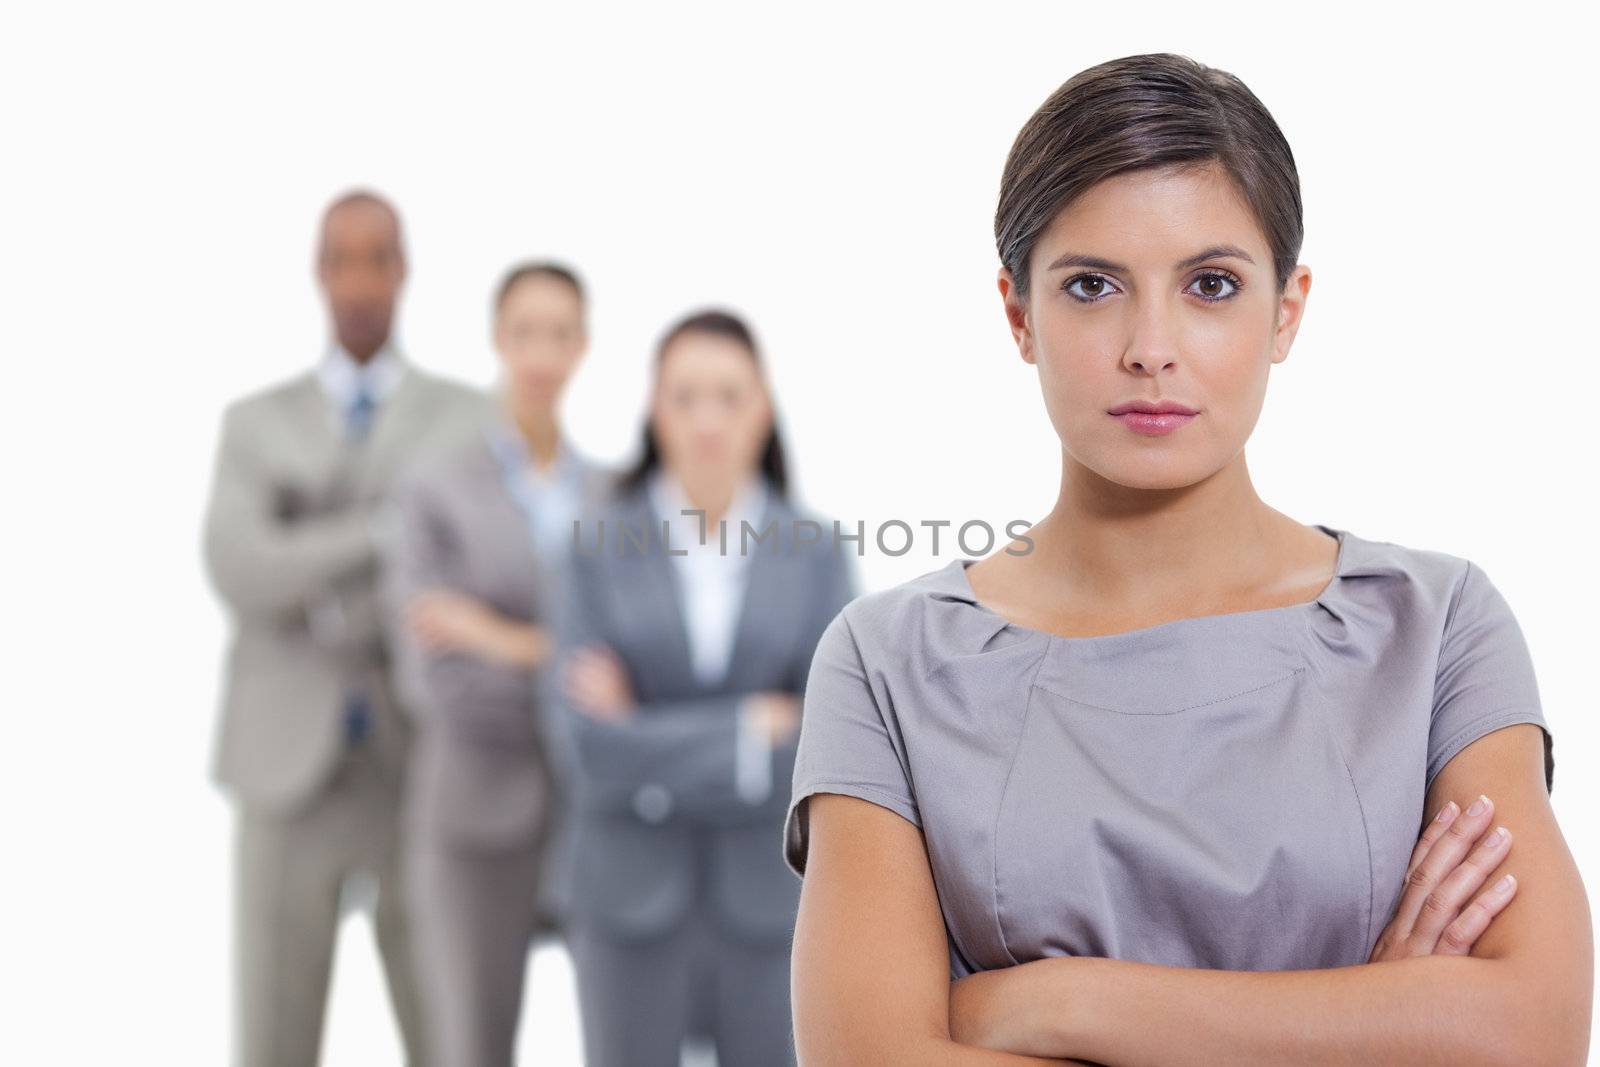 Close-up of a serious business team crossing their arms and standing behind each other with focus on the foreground woman